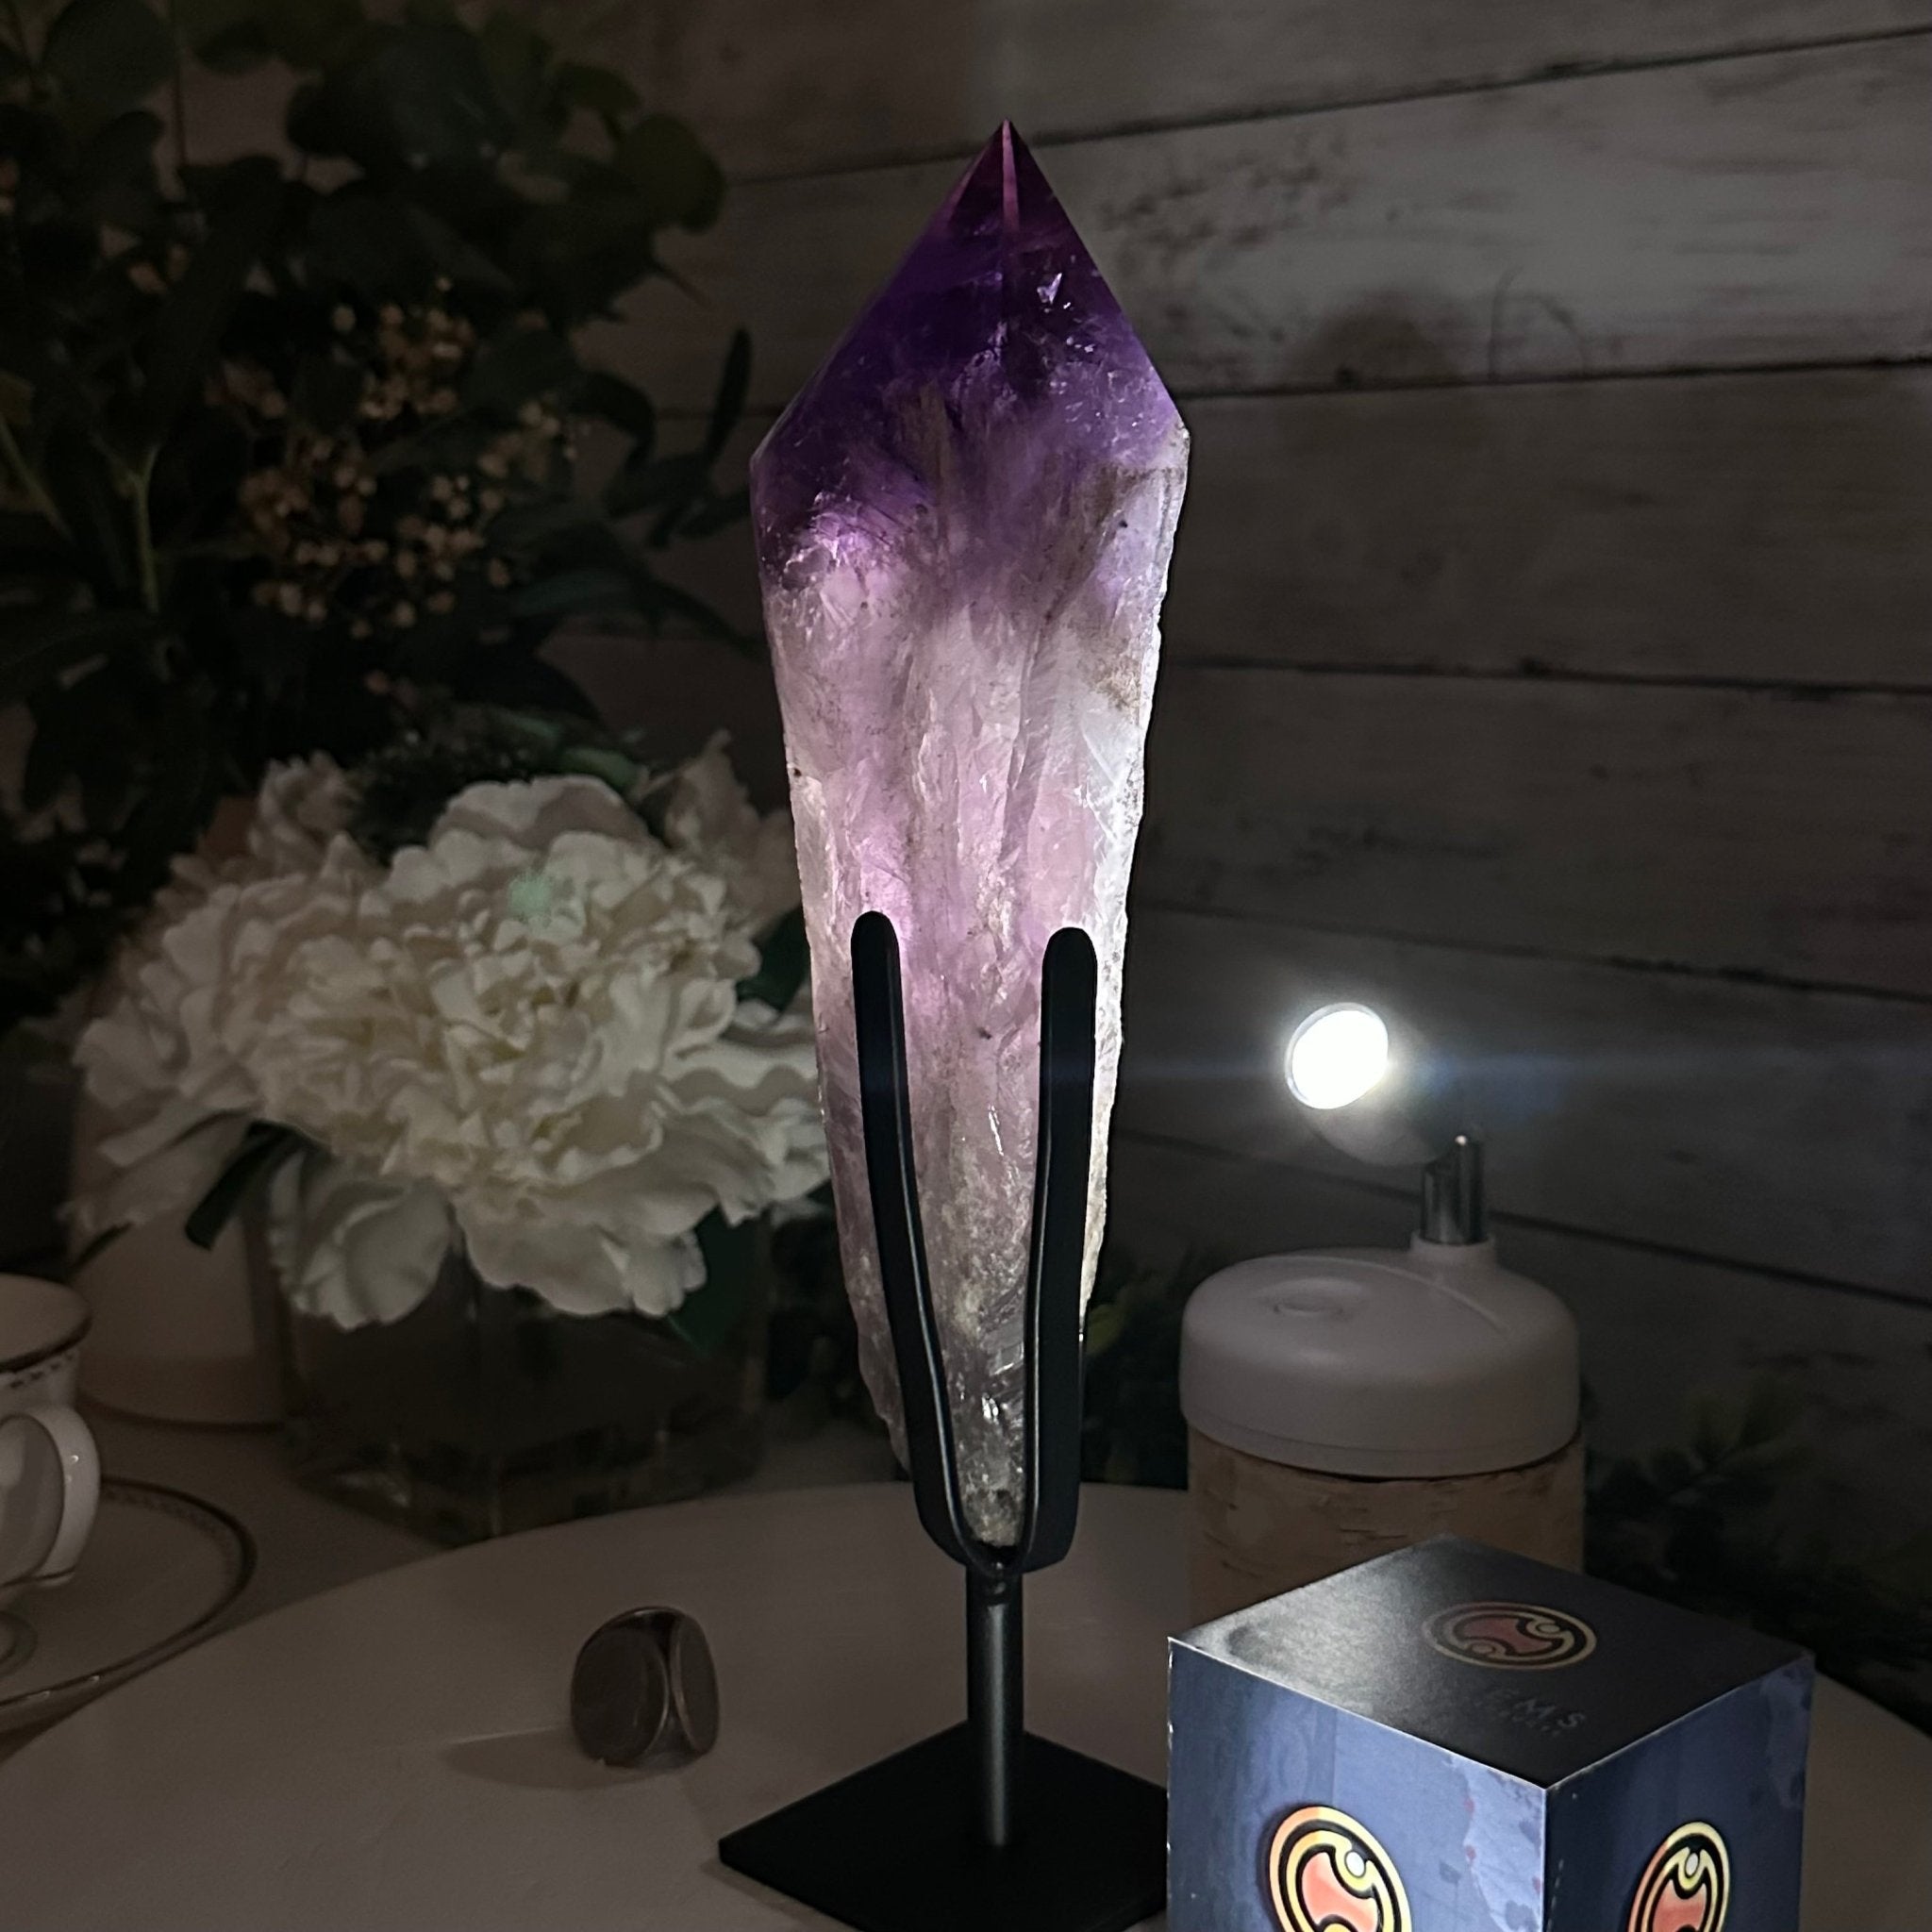 Super Quality Amethyst Wand on a Metal Stand, 2.6 lbs & 11.1" Tall #3123AM-011 - Brazil GemsBrazil GemsSuper Quality Amethyst Wand on a Metal Stand, 2.6 lbs & 11.1" Tall #3123AM-011Clusters on Fixed Bases3123AM-011